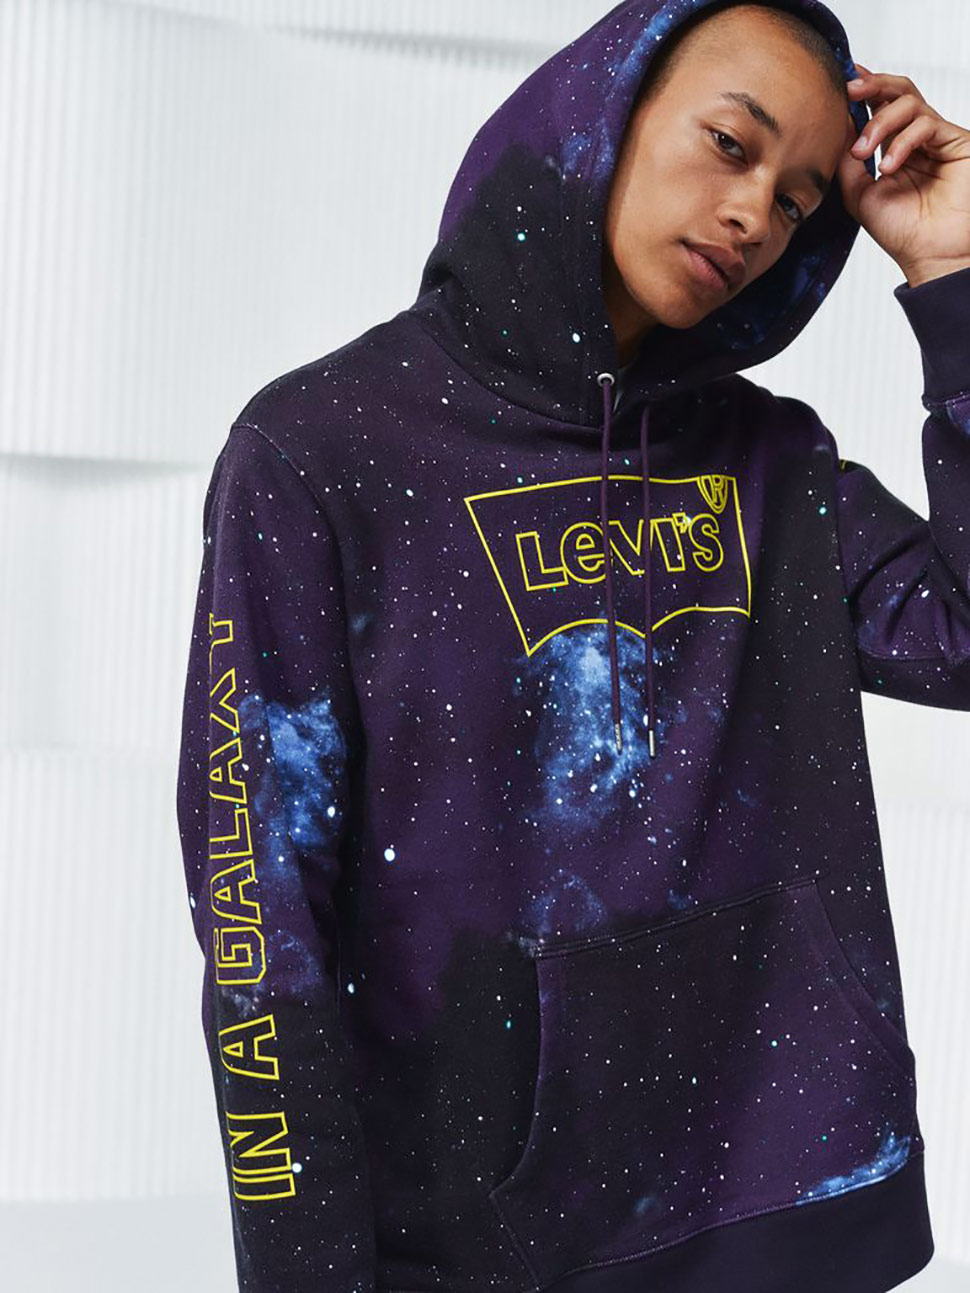 Levi's Will Collaborate With Star Wars This November